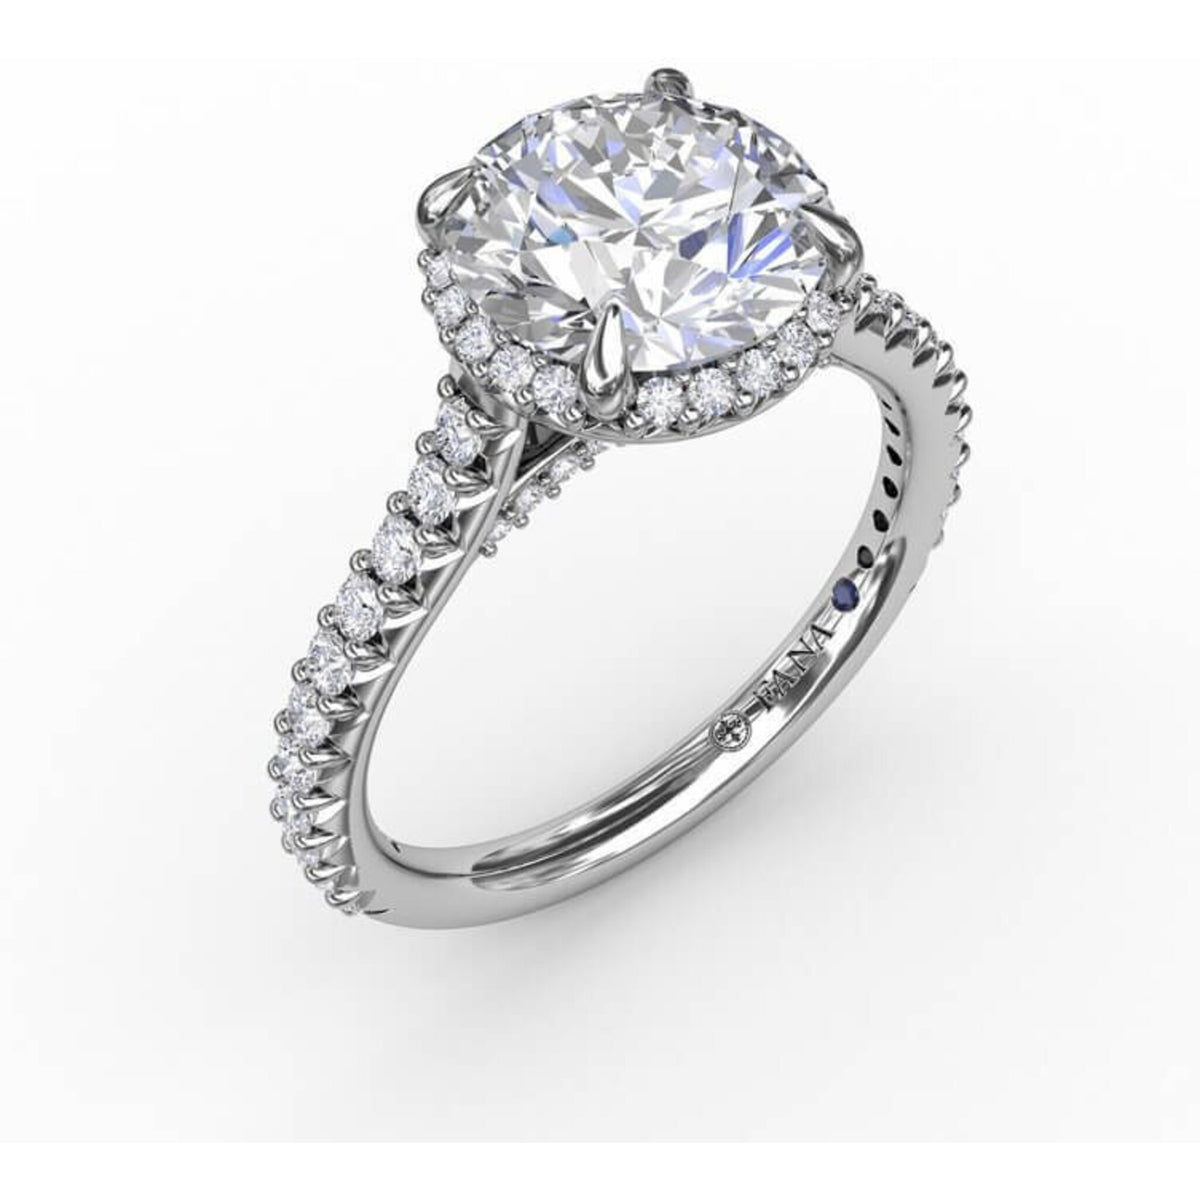 Fana Contemporary Round Diamond Halo Engagement Ring With Geometric Details